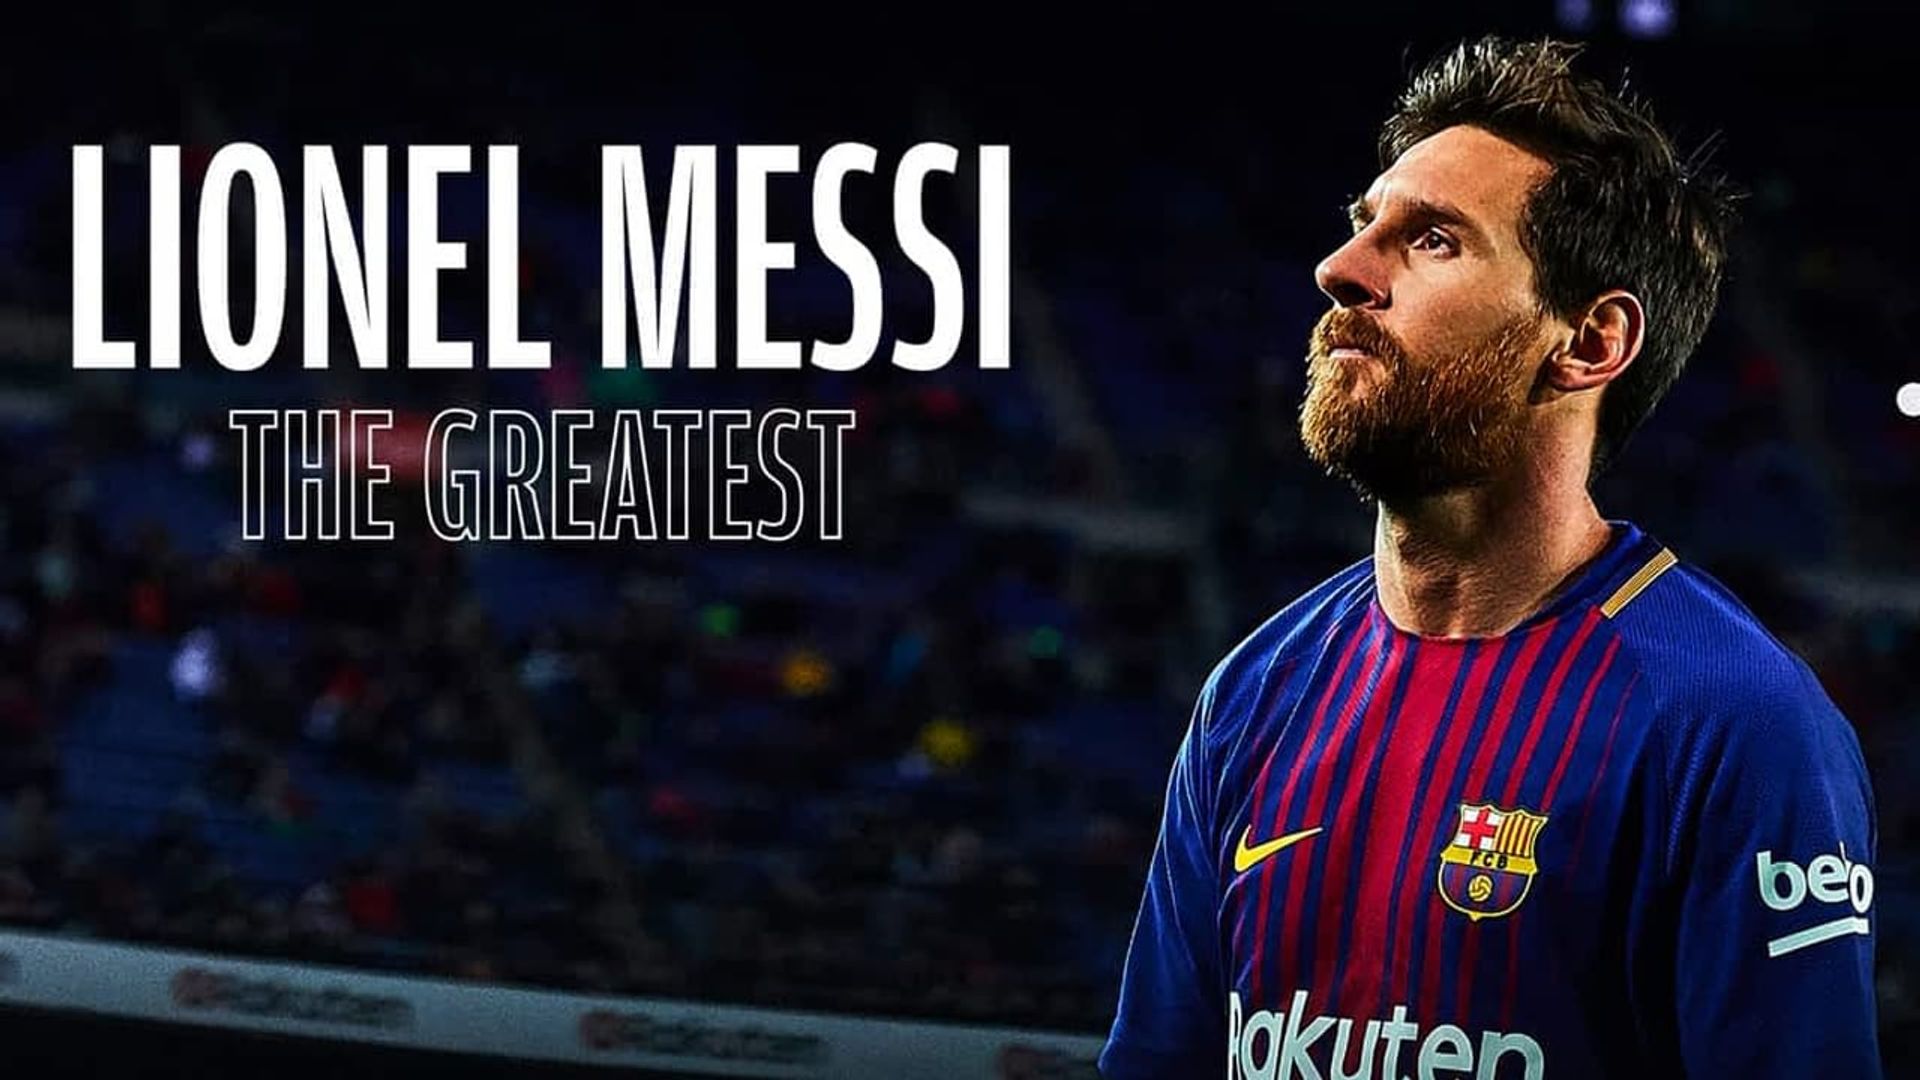 Lionel Messi: The Greatest background